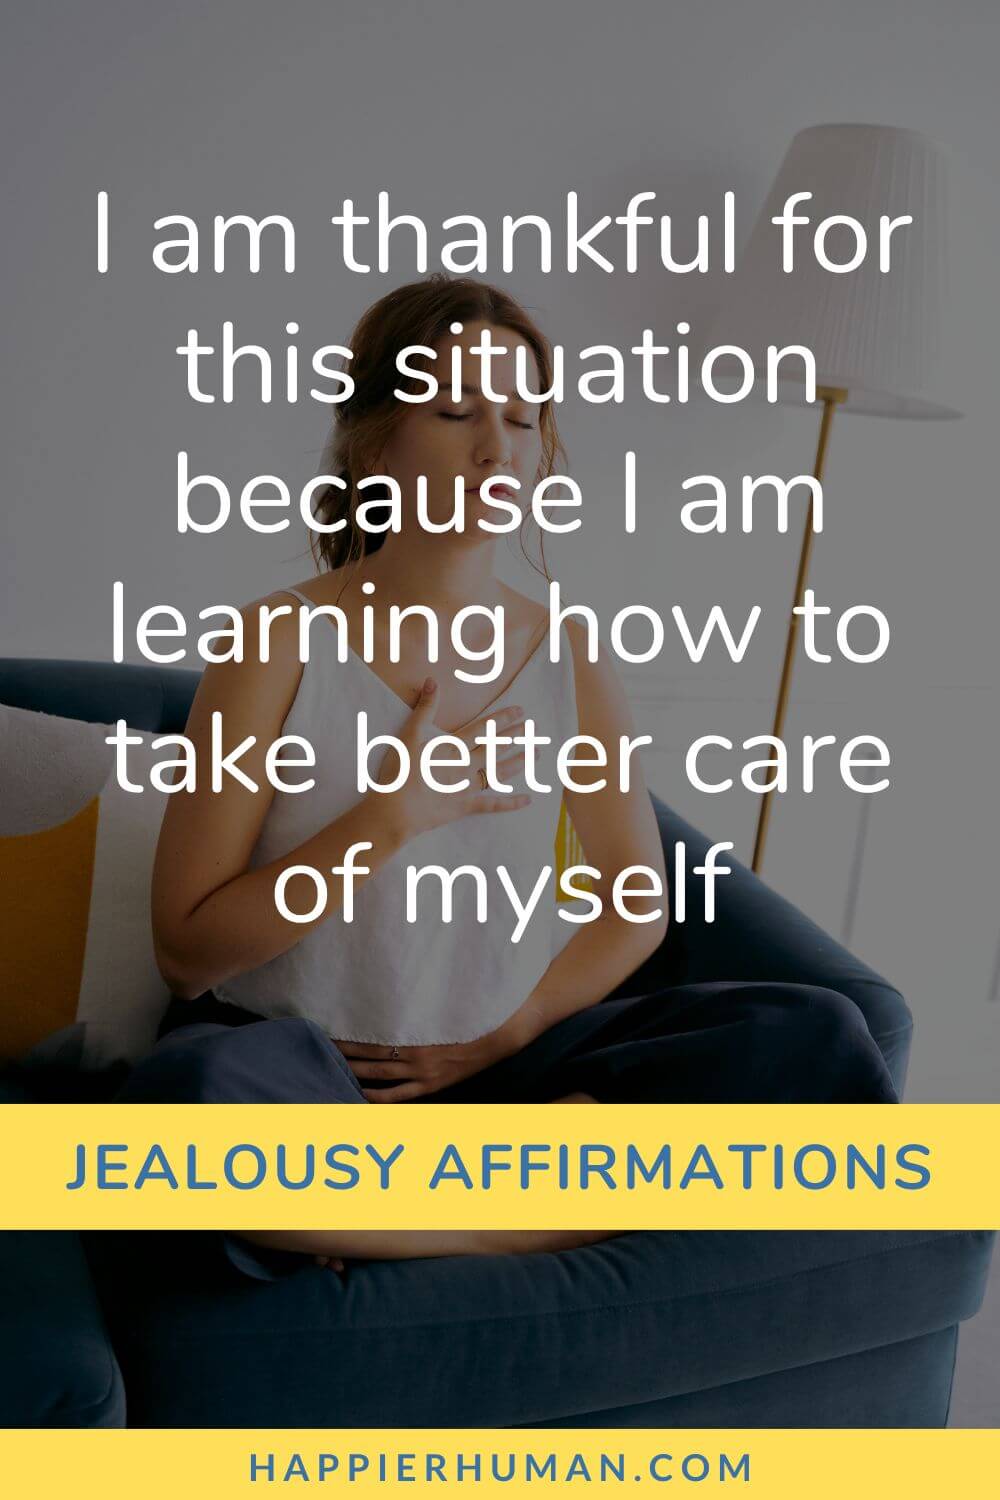 Affirmations for Jealousy - I am thankful for this situation because I am learning how to take better care of myself | words of affirmation | affirmations for insecurity in relationship | positive affirmations for jealousy